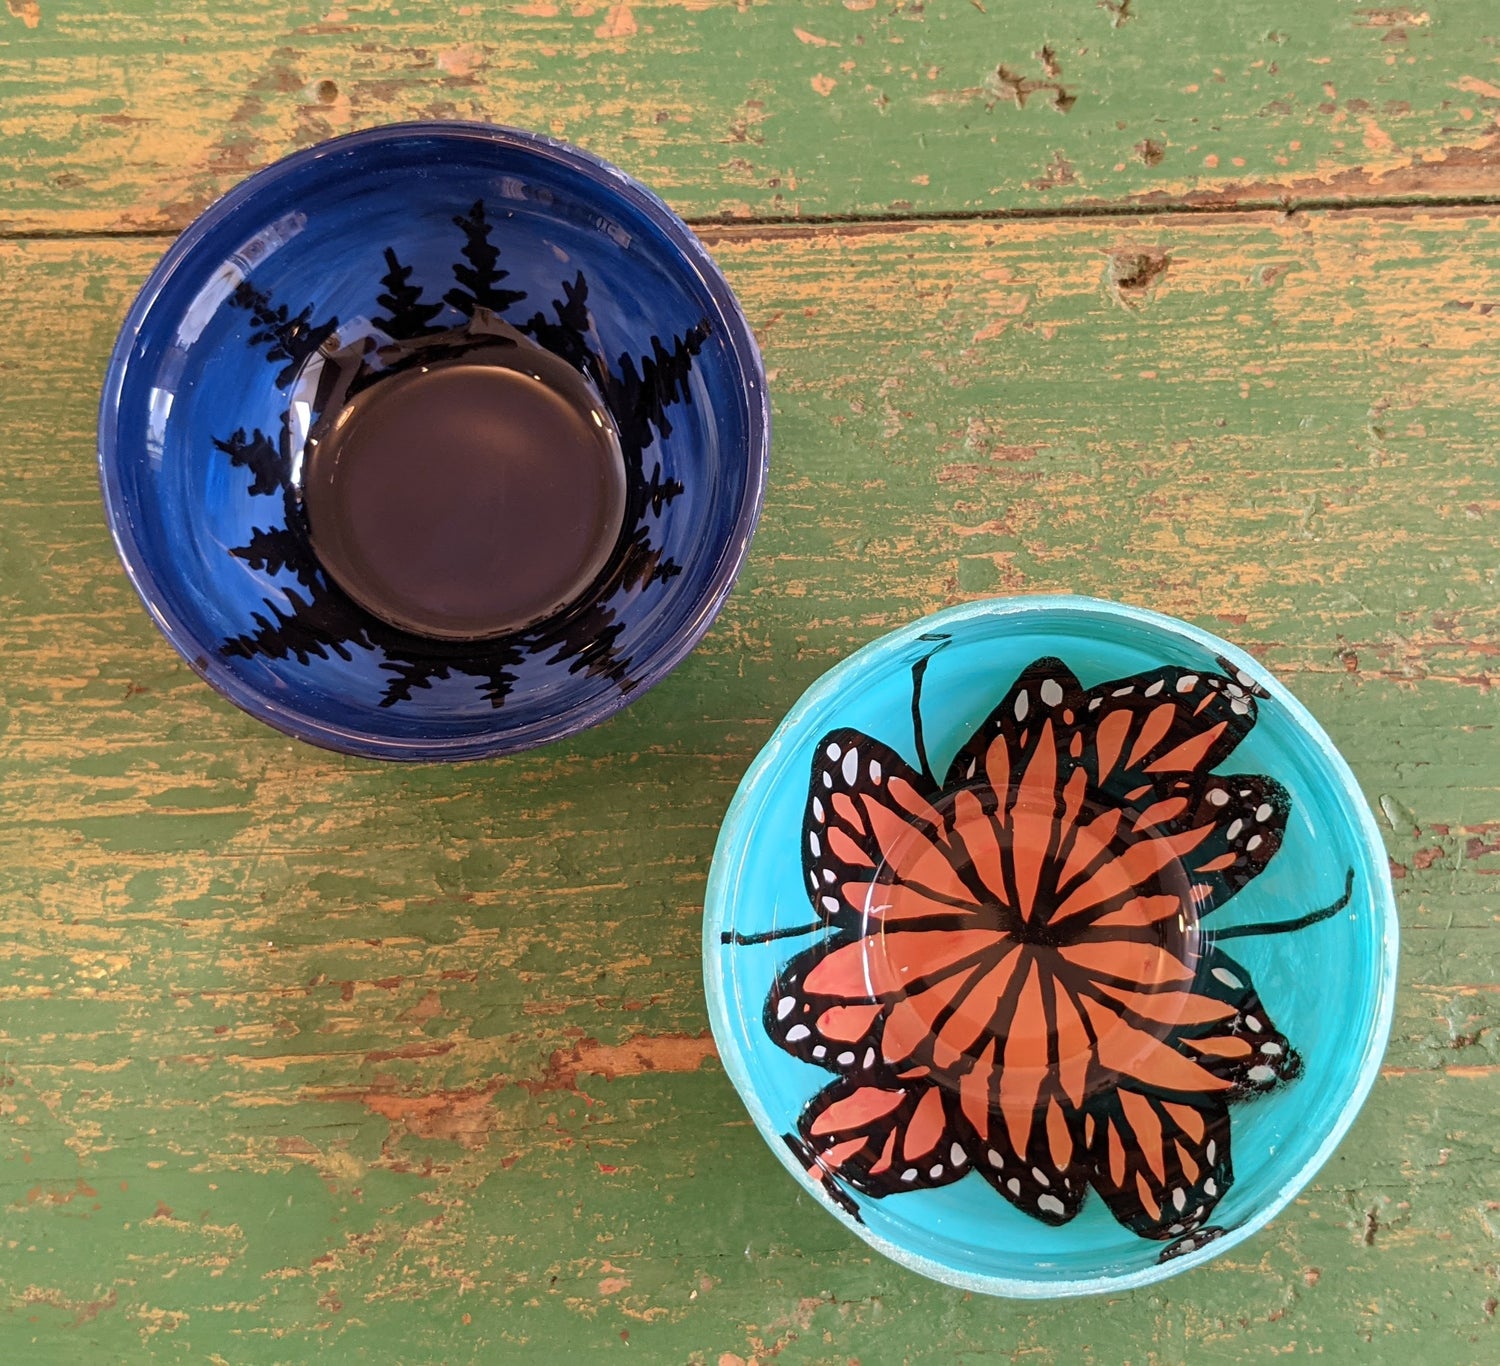 Mini painted bowls, night forest and monarch designs, by Skavenge Art